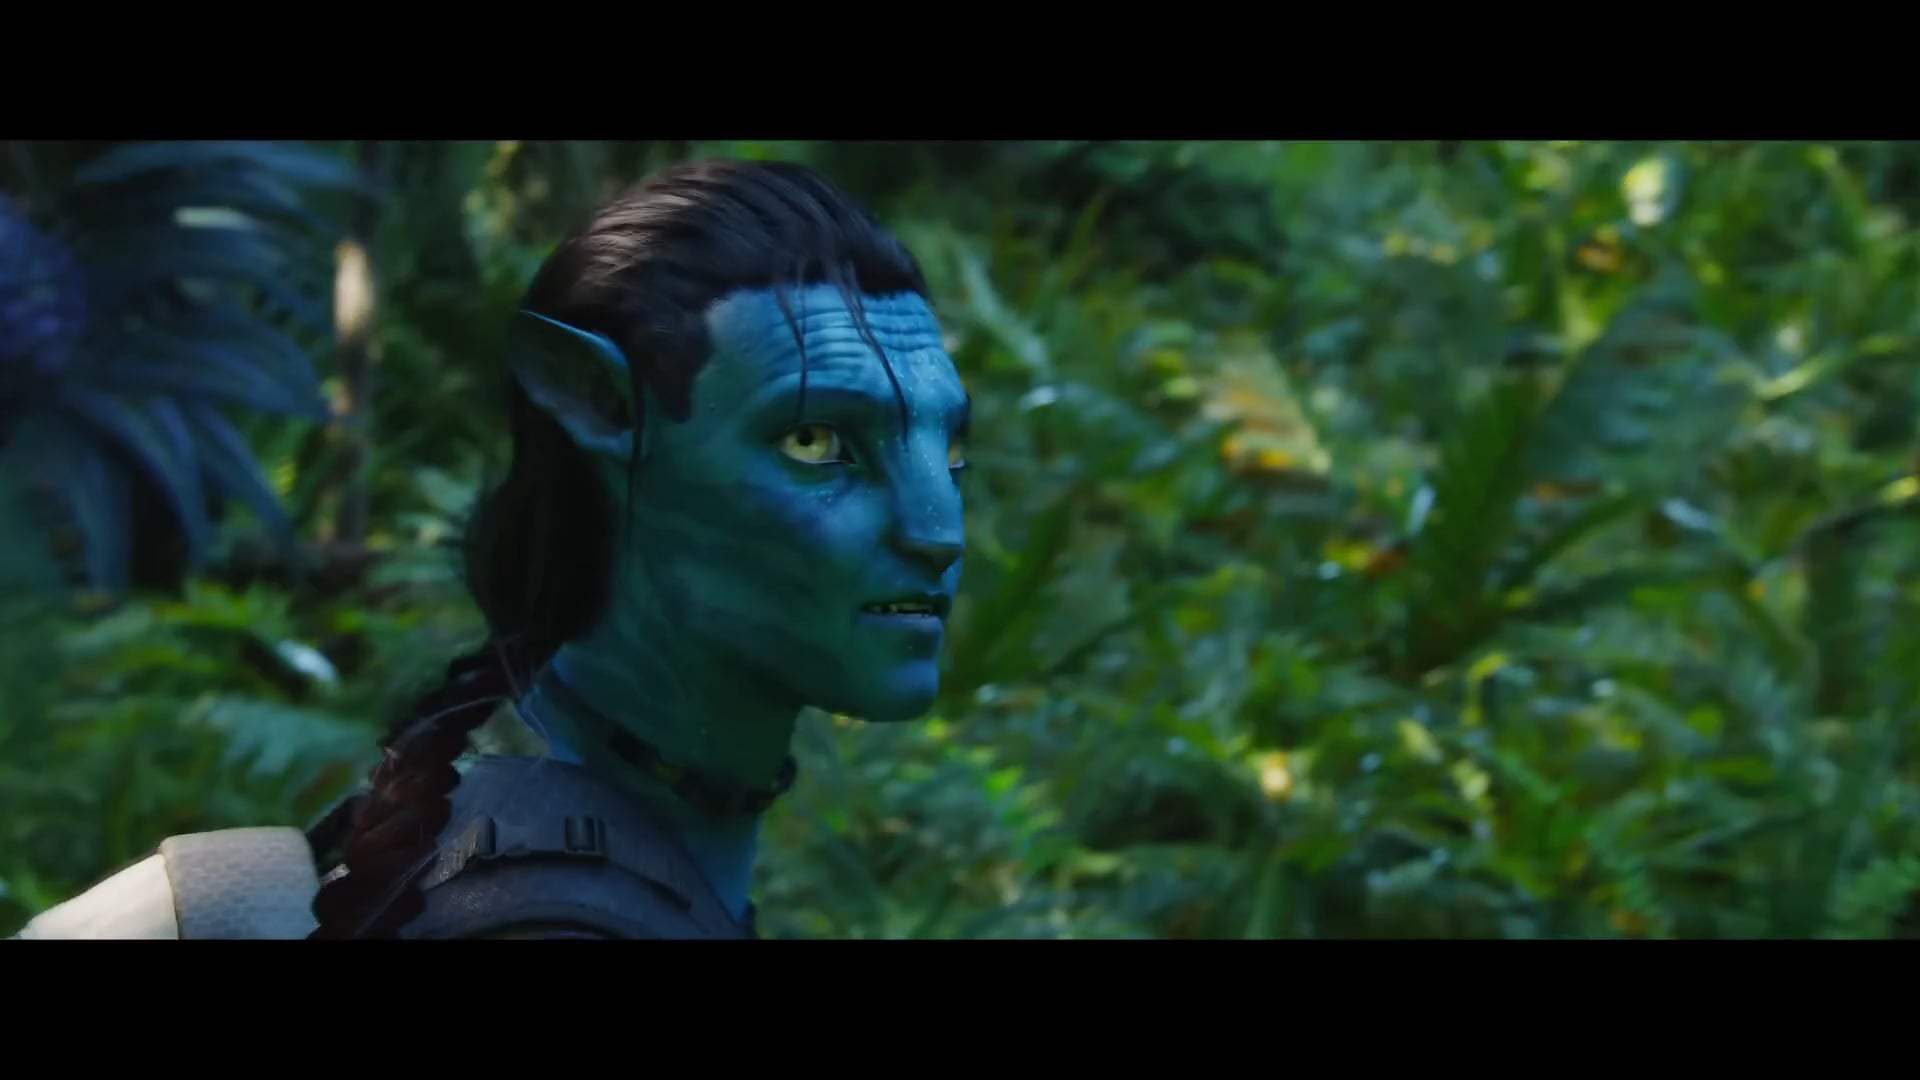 Avatar Back in Theaters Trailer (2009) Screen Capture #2